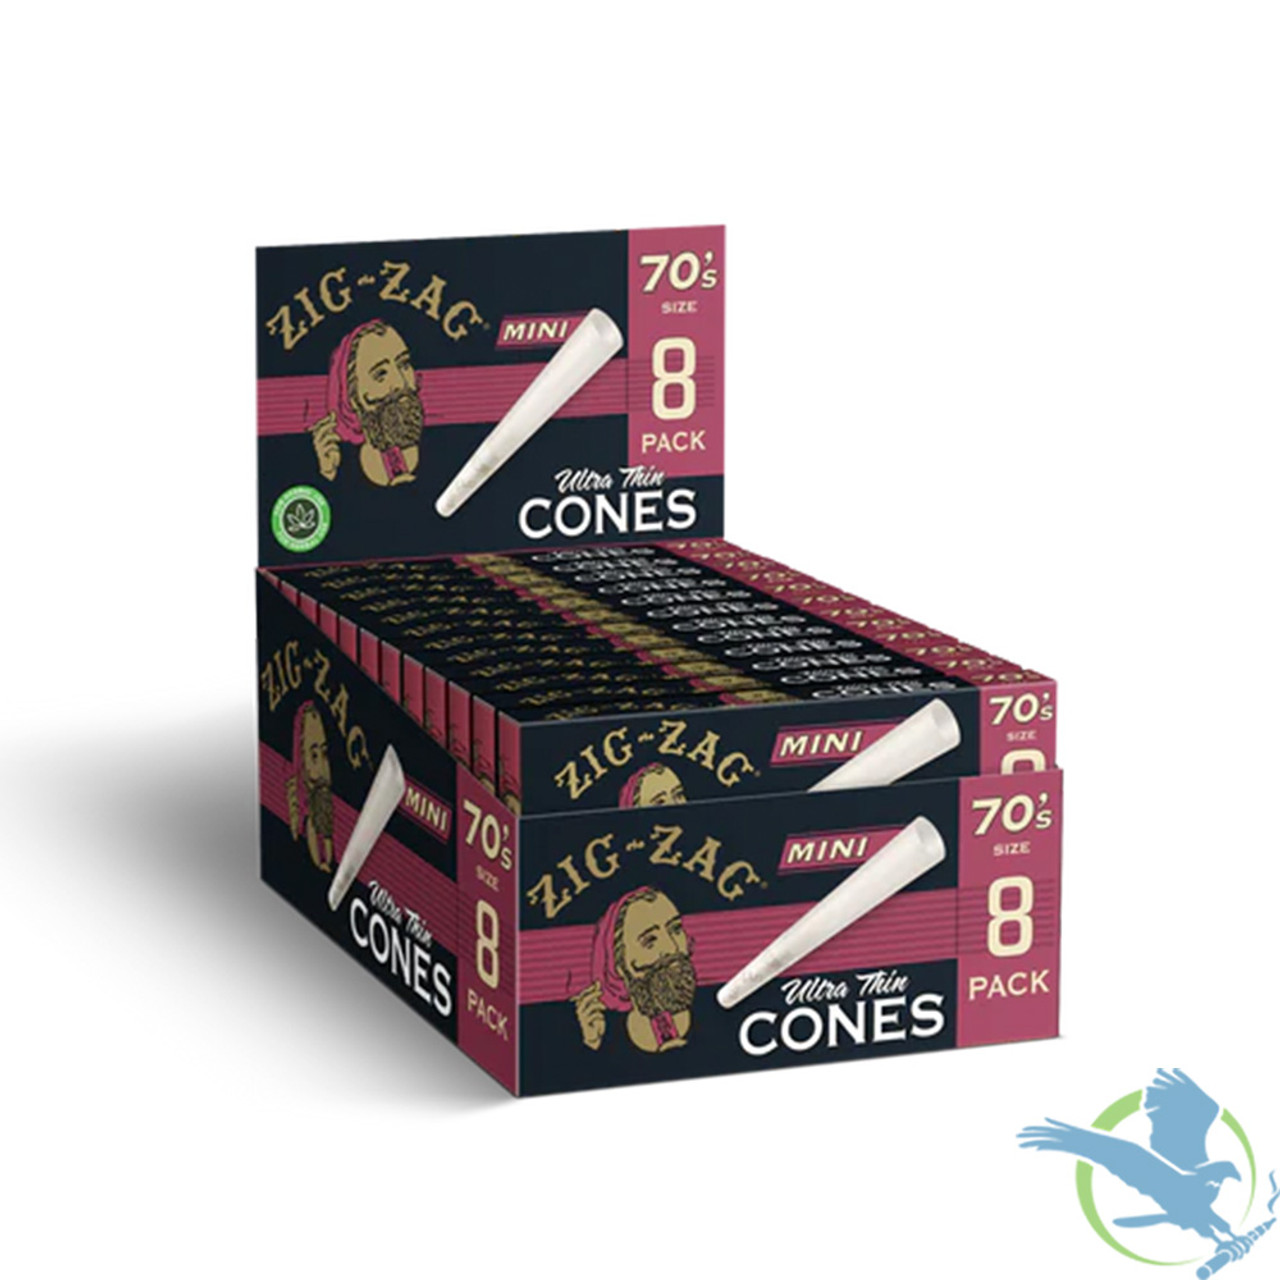 https://cdn11.bigcommerce.com/s-964anr/images/stencil/1280x1280/products/23364/114377/Zig-Zag-70s-Mini-Pre-Rolled-Cones---Pack-of-8-Cones---Display-of-18-Packs-MSRP-3.29-each--Ultra-Thin-Display-Wholesale__59727.1683309584.jpg?c=2